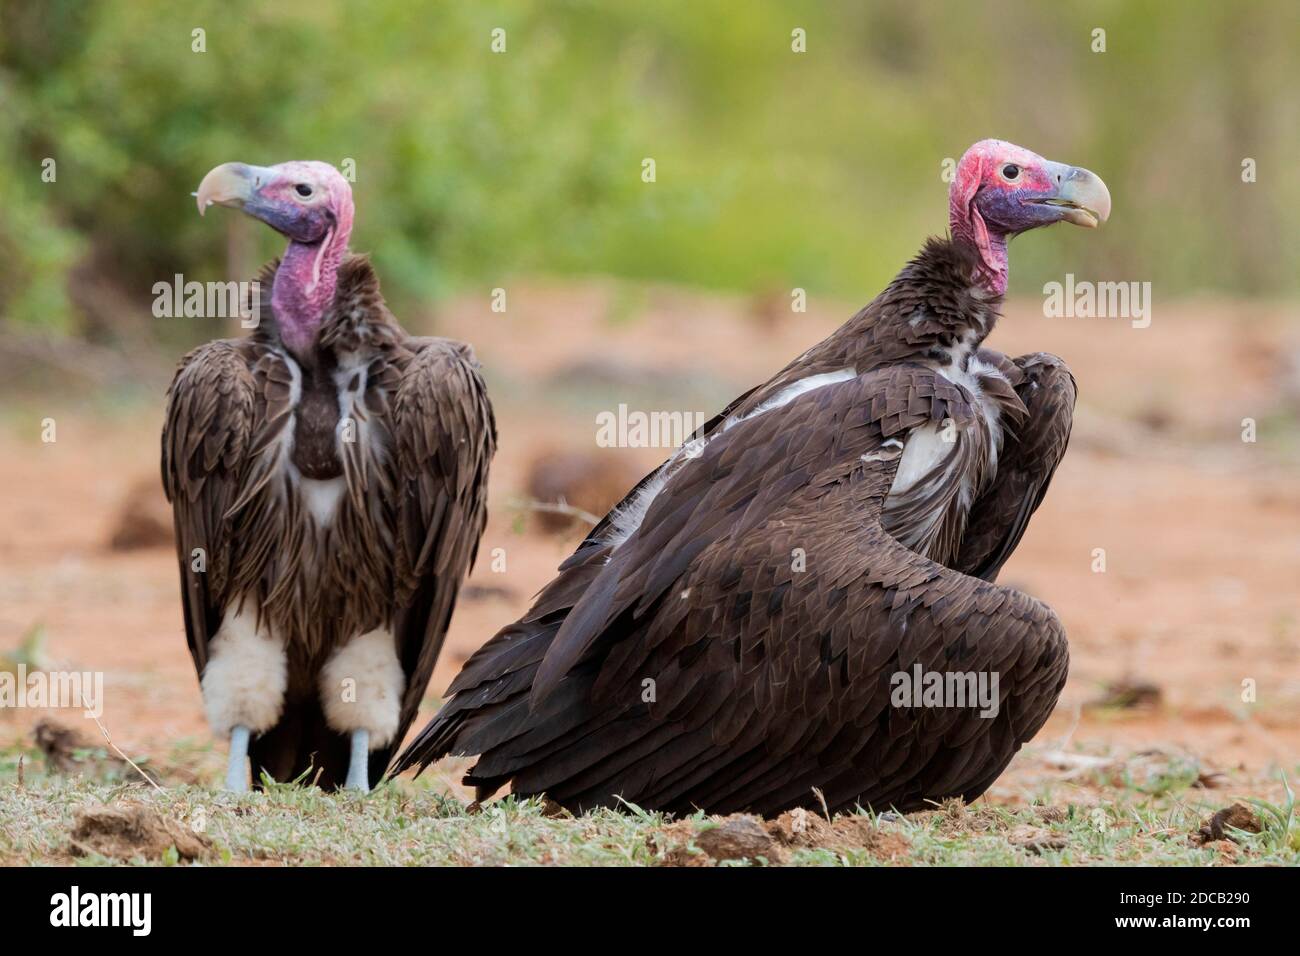 lappet-faced vulture (Aegypius tracheliotus, Torgos tracheliotus), two adults standing on the ground, South Africa, Mpumalanga Stock Photo